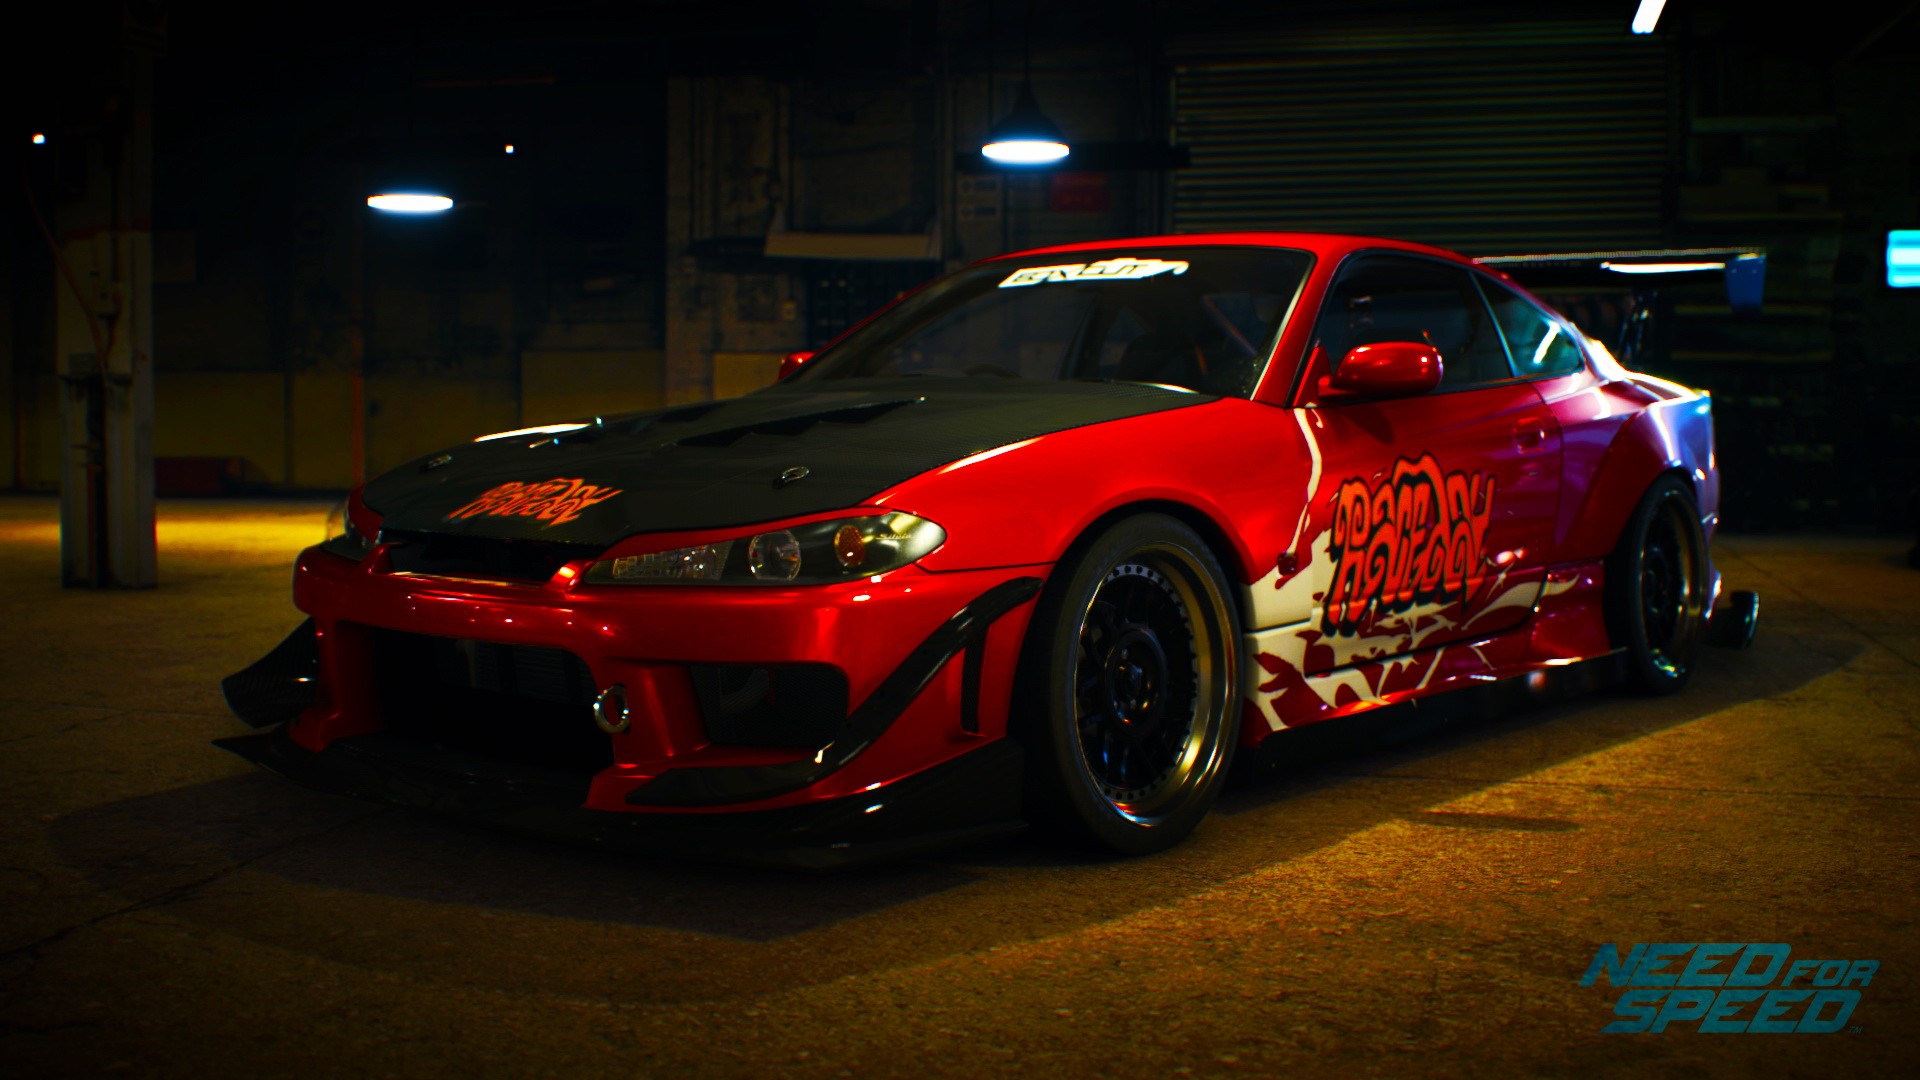 Need for Speed, Nissan, S15, Silvia S15, Nissan Silvia S15, Car Wallpaper